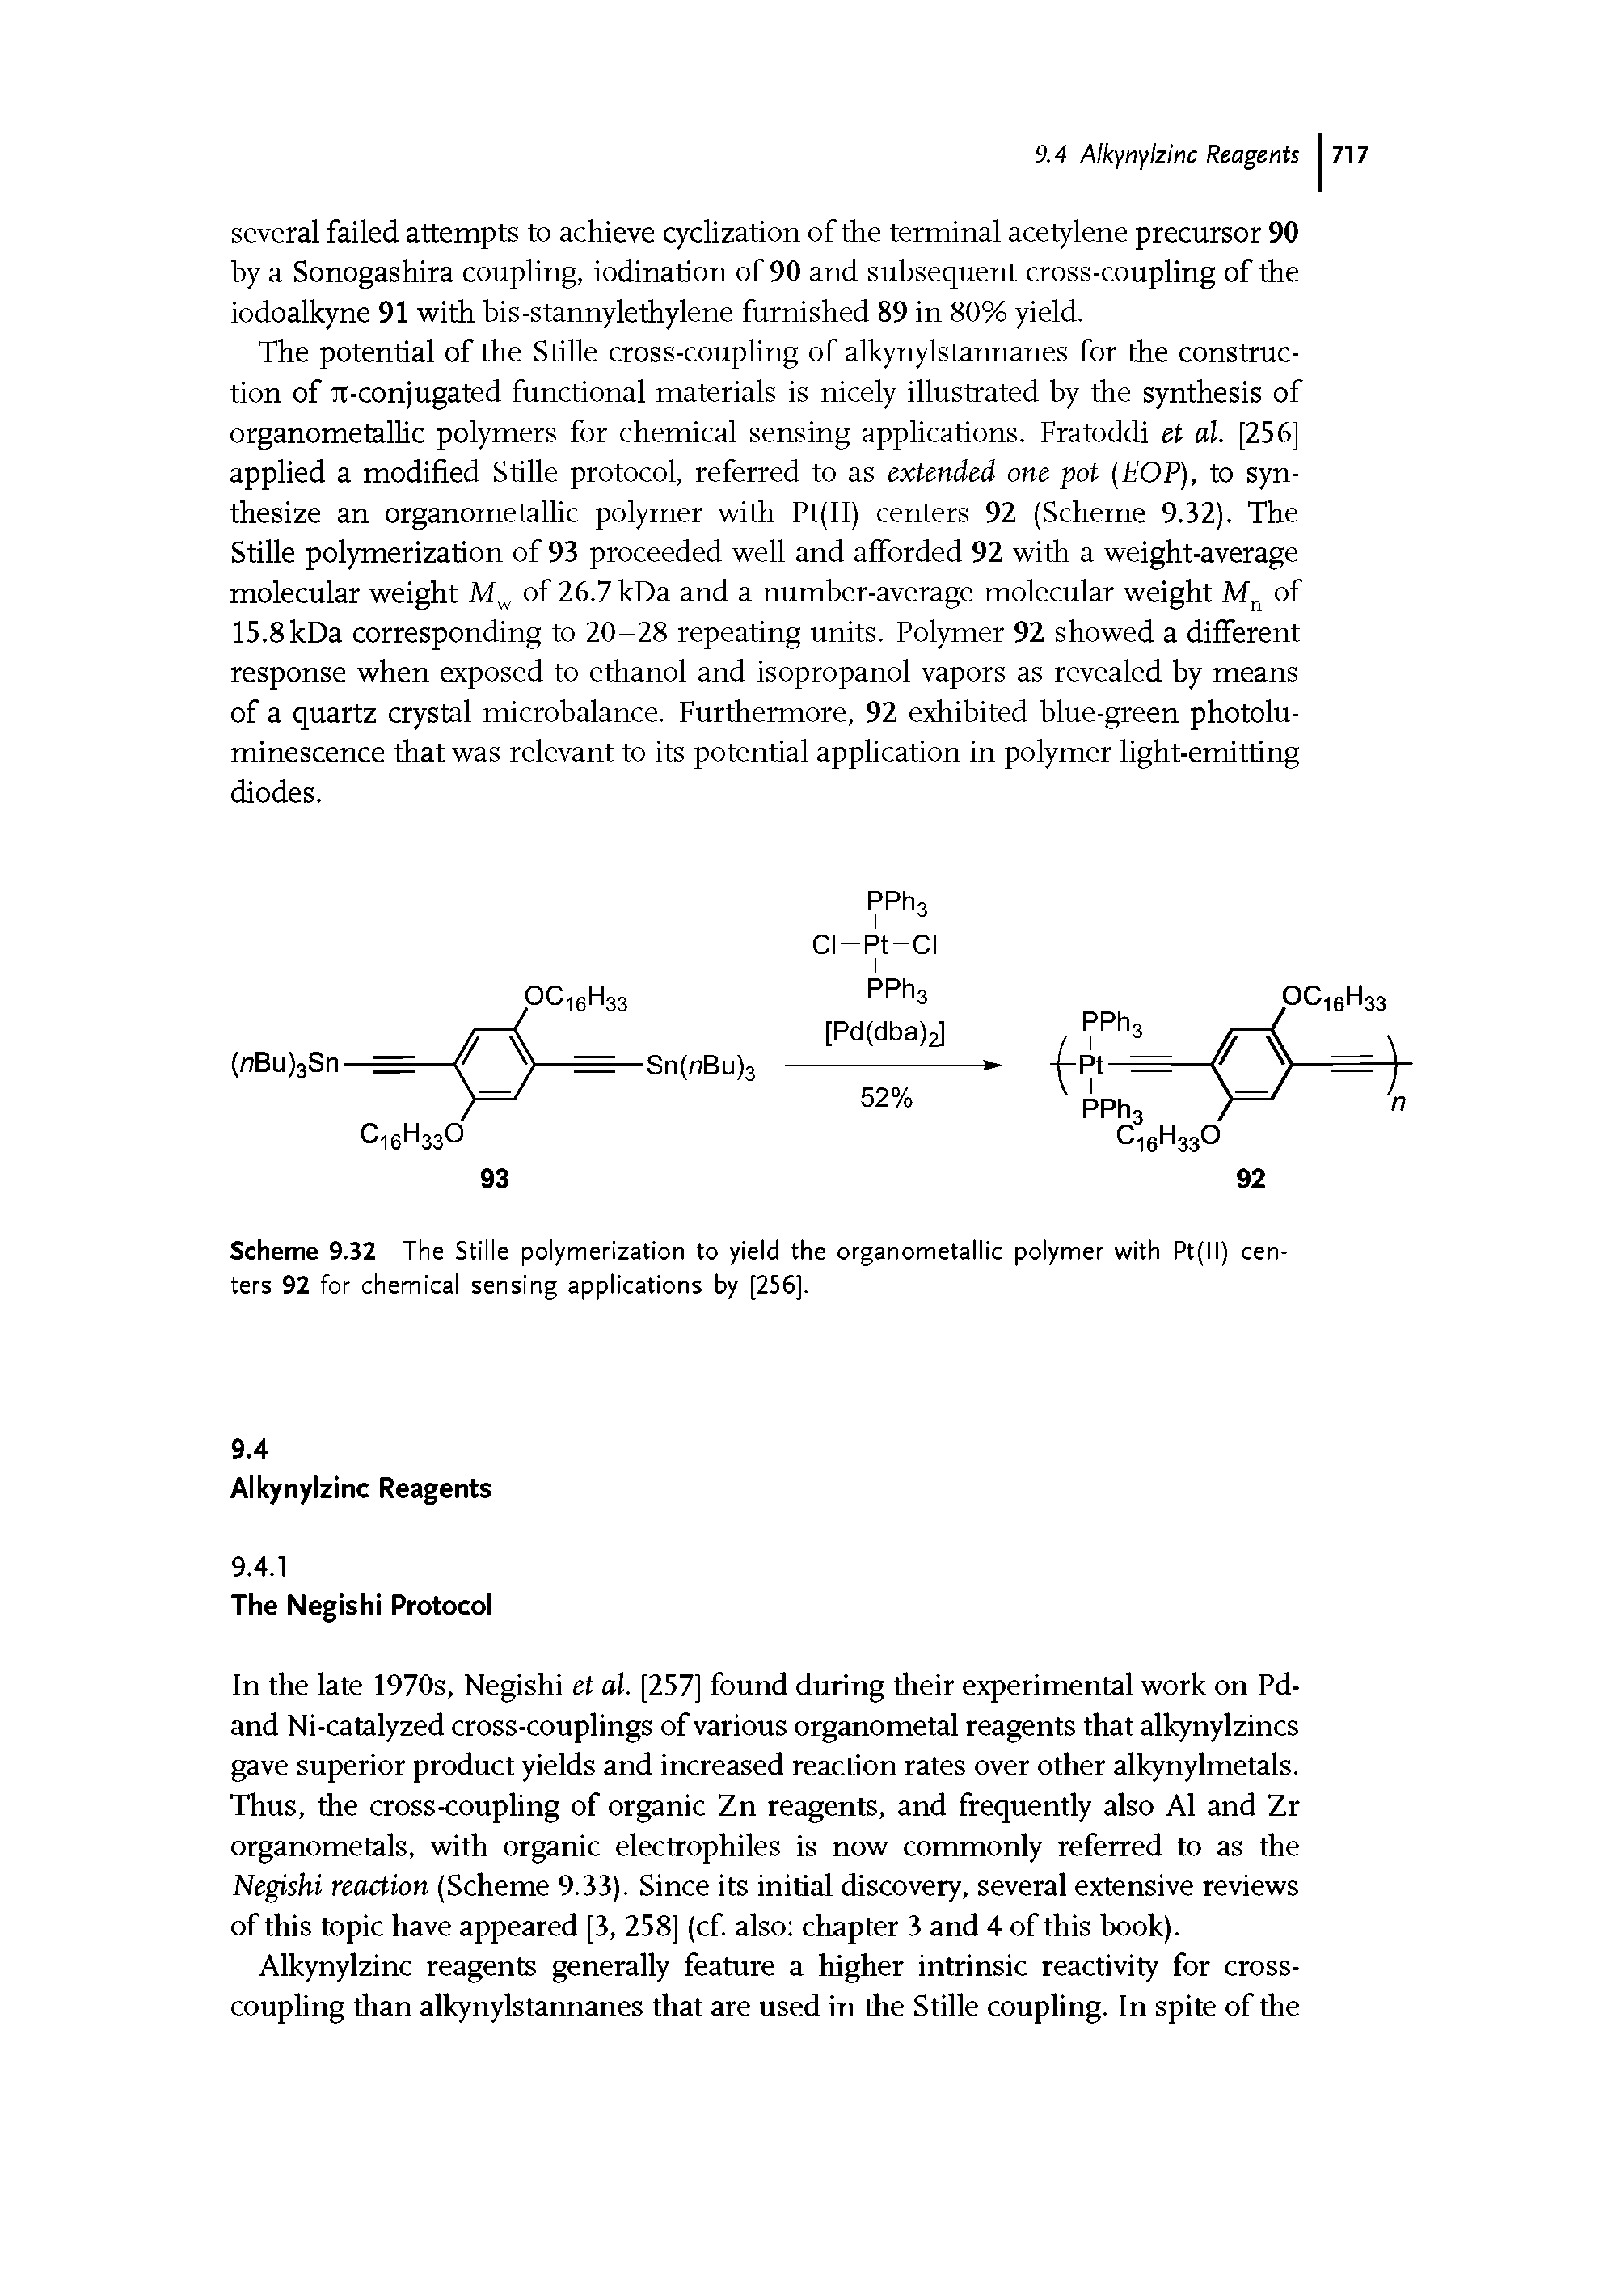 Scheme 9.32 The Stille polymerization to yield the organometallic polymer with Pt(ll) centers 92 for chemical sensing applications by [256].